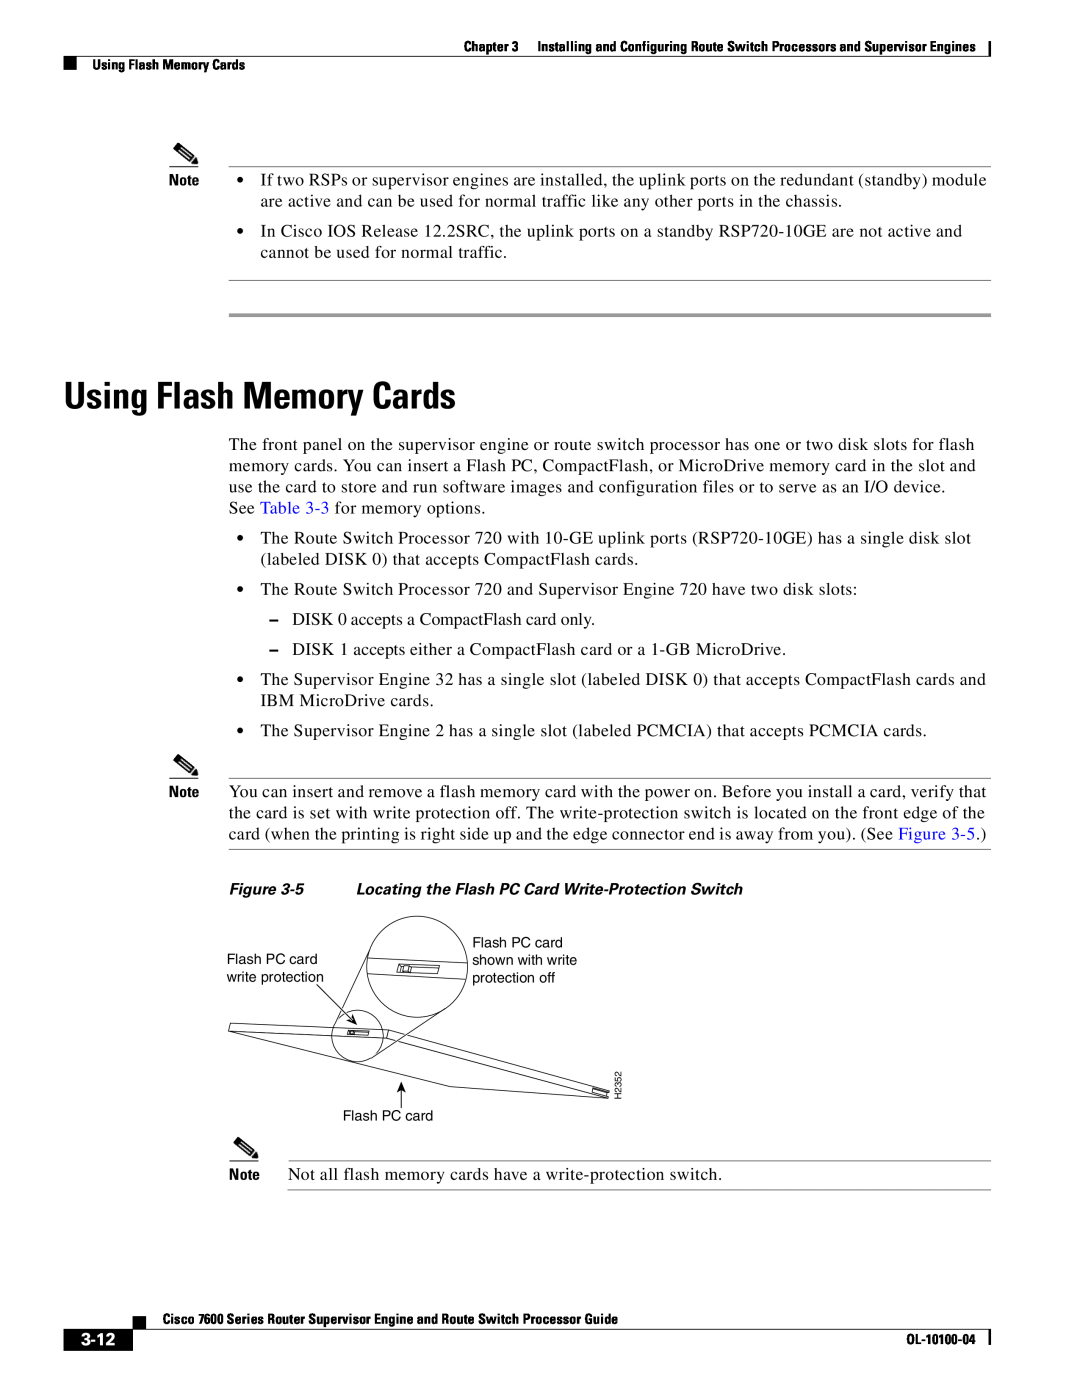 Cisco Systems 7600 manual Using Flash Memory Cards, 3-12 